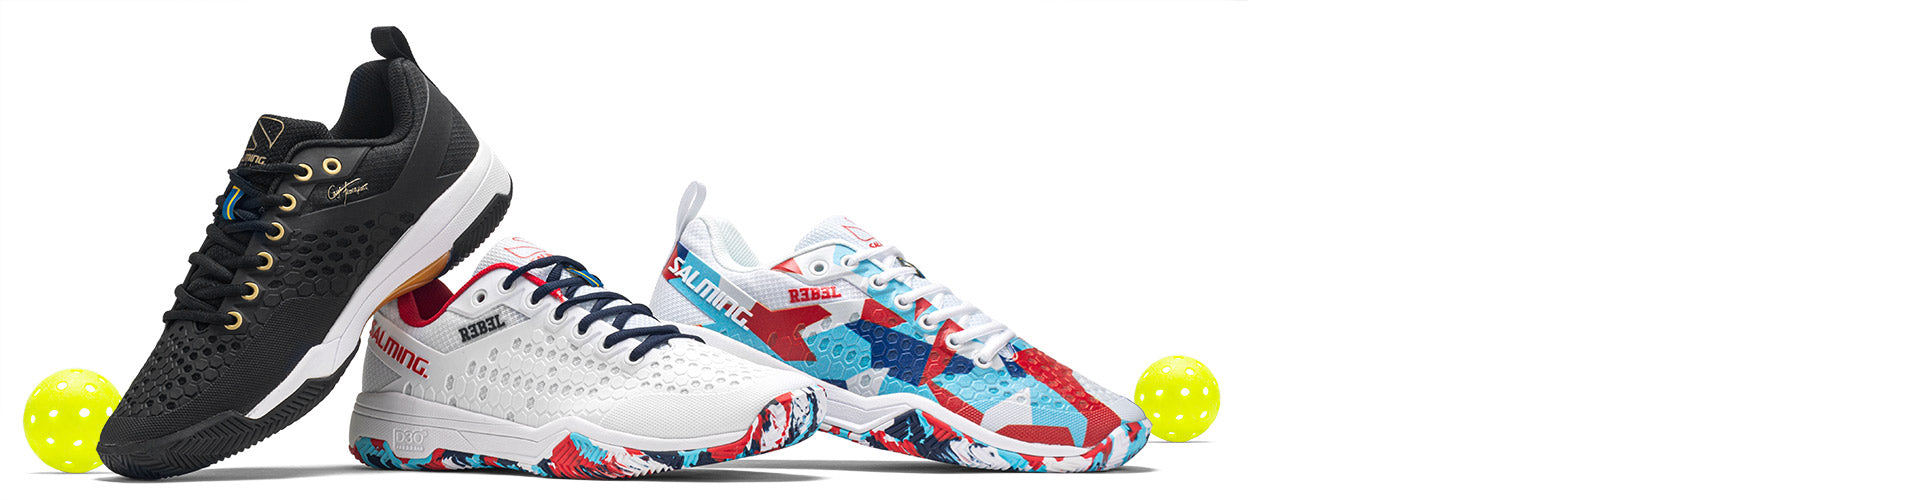 Salming Pickleball Shoes